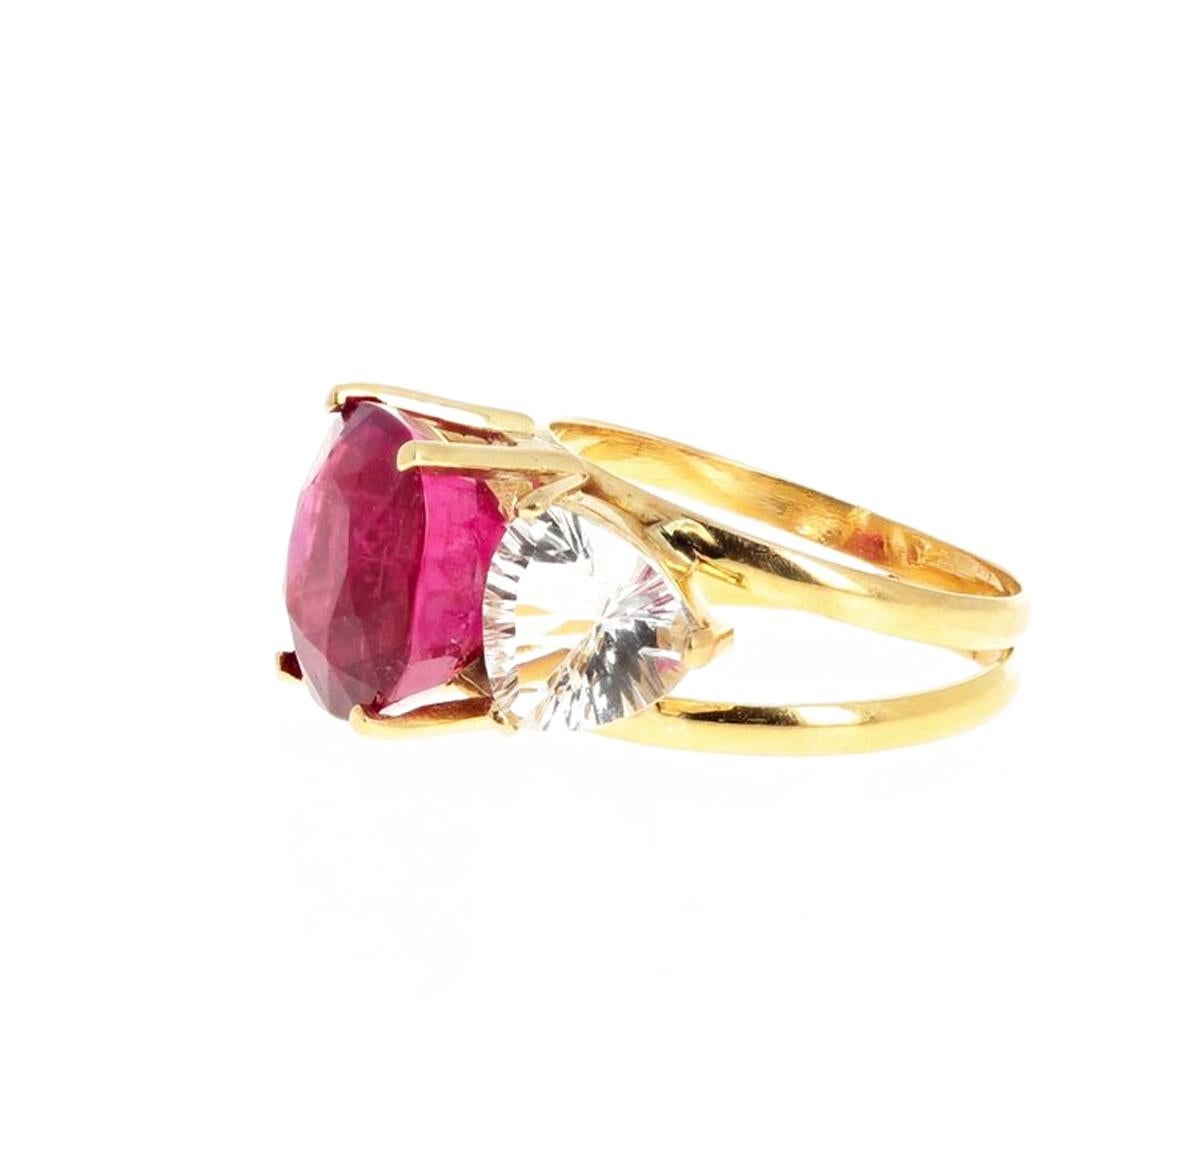 Gemjunky Glamorouse 7.2 Ct Tourmaline and Silver Topaz 18 Kt Yellow Gold Ring 1